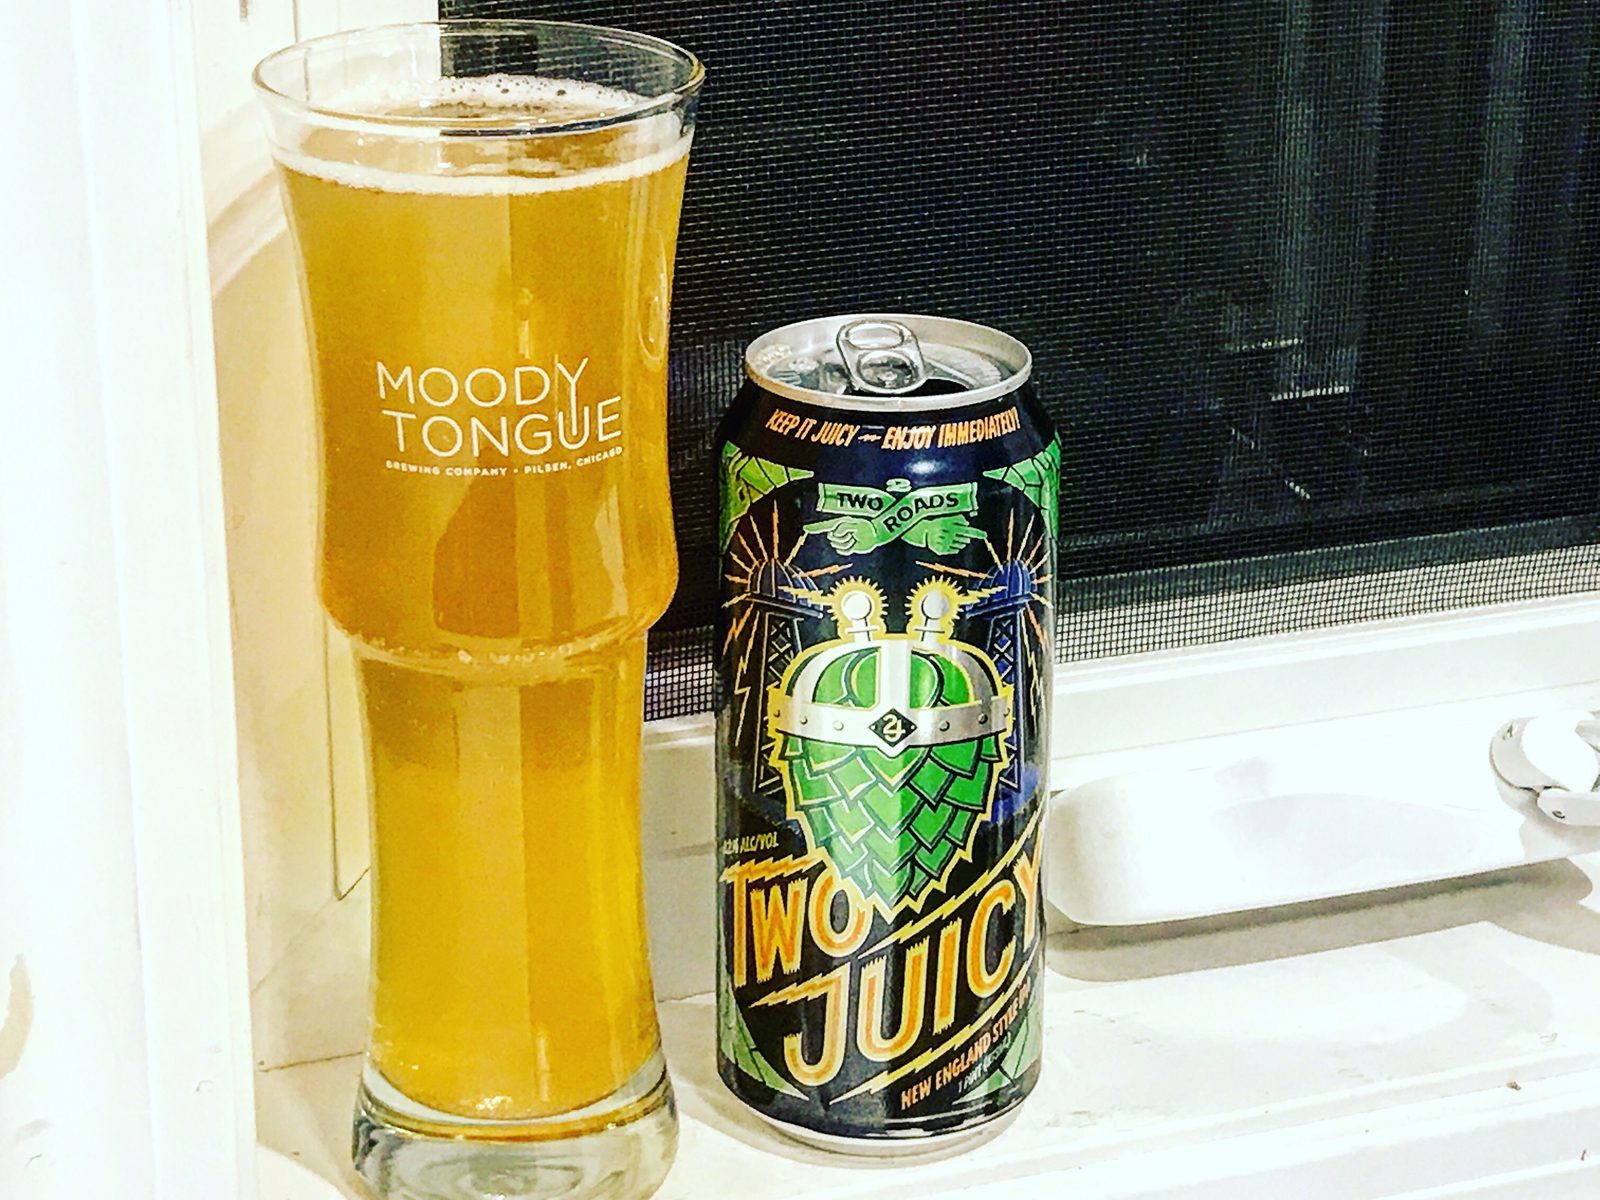 Two Roads Brewing Company: Two Juicy